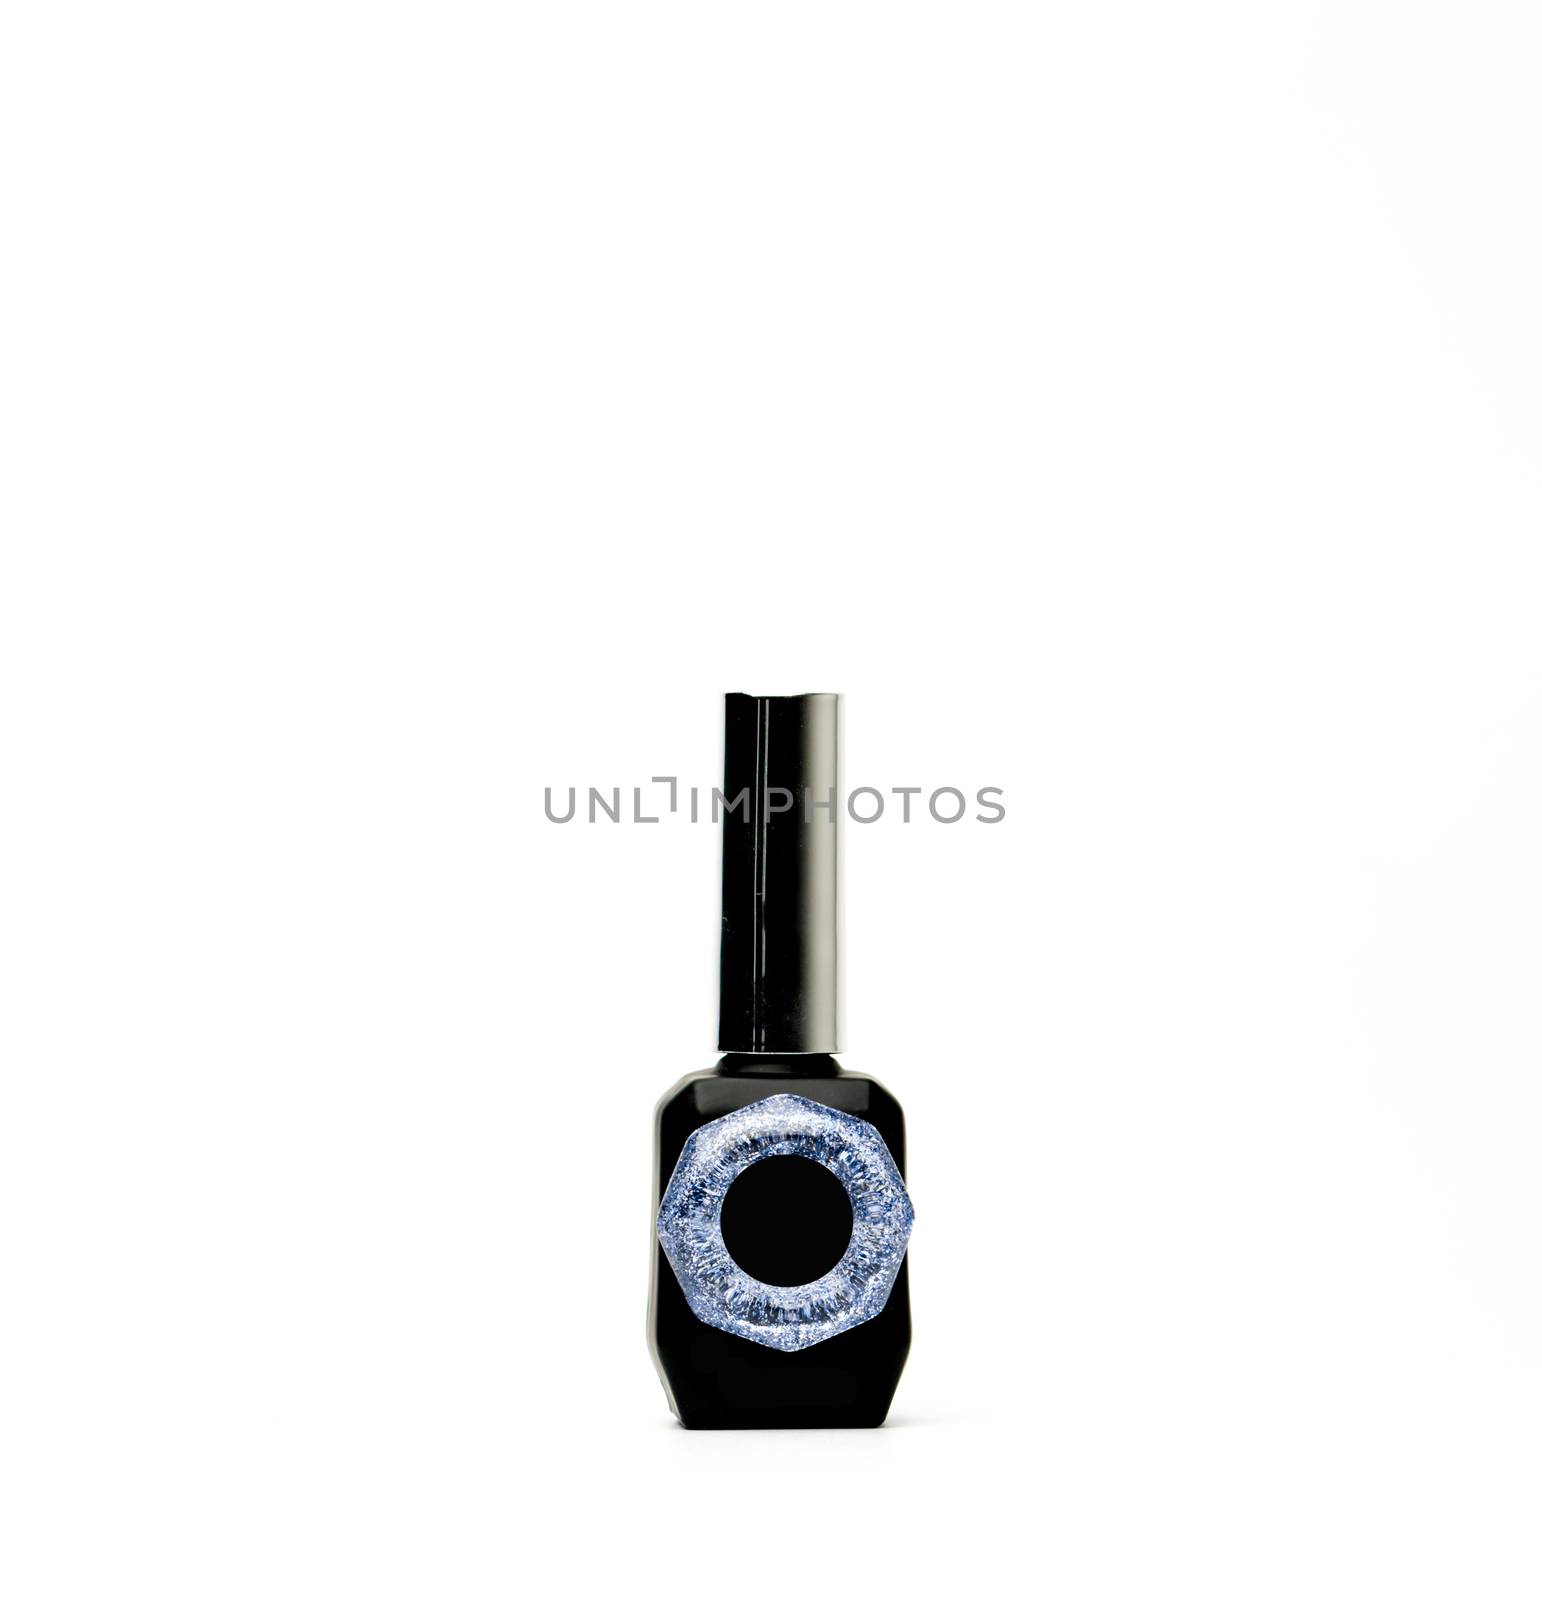 Unique nail polish bottle isolated on white background with copy space and blank label, just add your own text